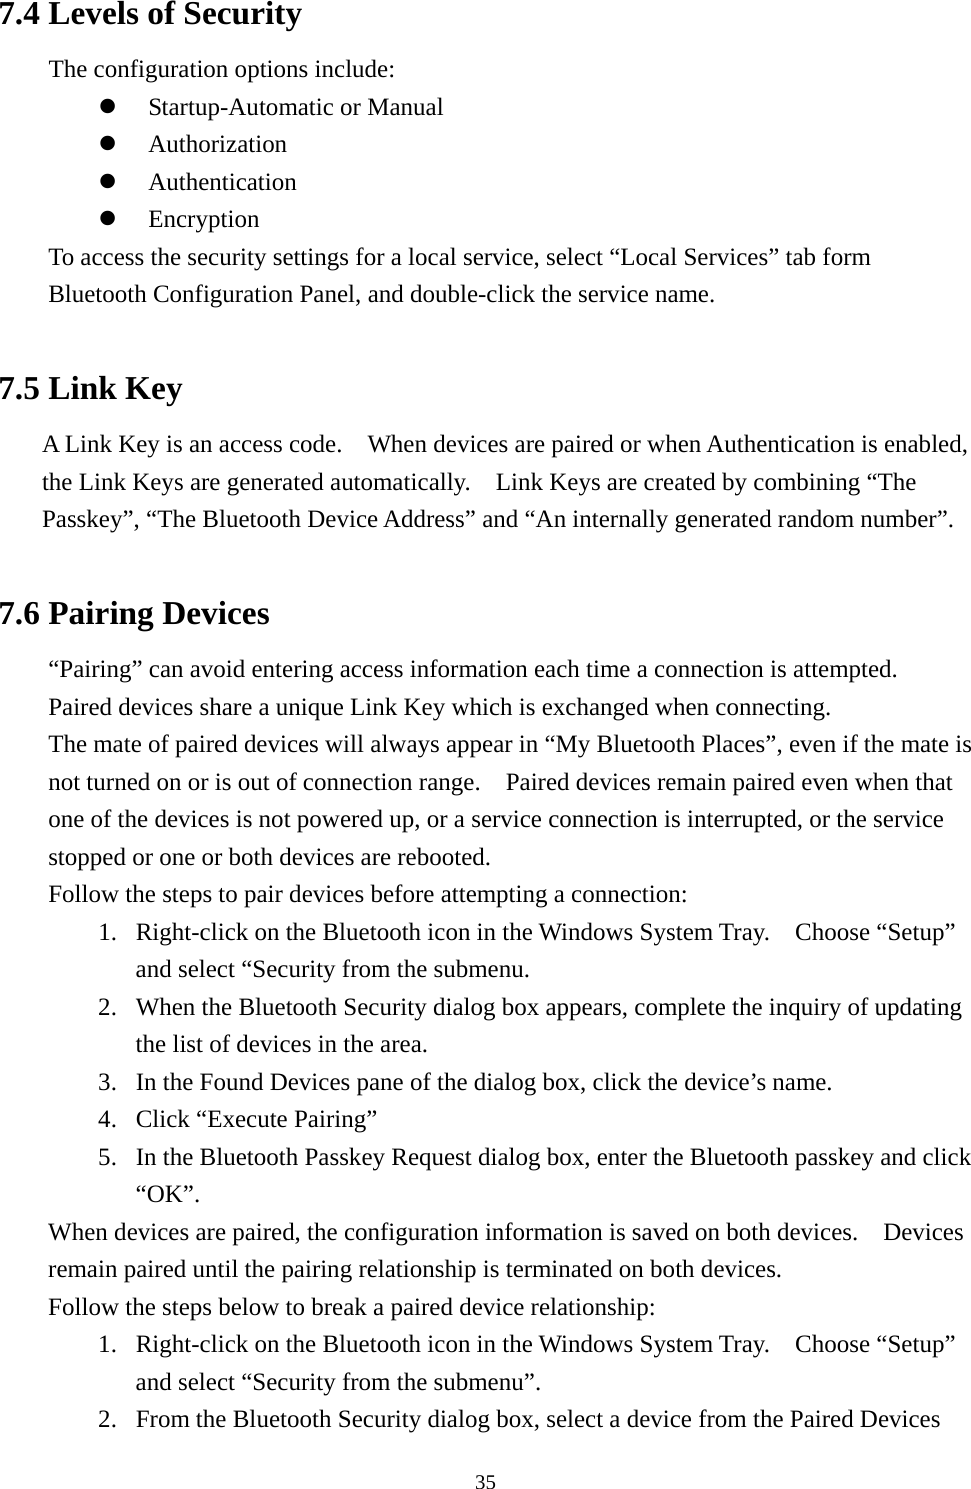   357.4 Levels of Security   The configuration options include:   Startup-Automatic or Manual   Authorization   Authentication   Encryption To access the security settings for a local service, select “Local Services” tab form Bluetooth Configuration Panel, and double-click the service name.  7.5 Link Key A Link Key is an access code.    When devices are paired or when Authentication is enabled, the Link Keys are generated automatically.    Link Keys are created by combining “The Passkey”, “The Bluetooth Device Address” and “An internally generated random number”.  7.6 Pairing Devices “Pairing” can avoid entering access information each time a connection is attempted.   Paired devices share a unique Link Key which is exchanged when connecting. The mate of paired devices will always appear in “My Bluetooth Places”, even if the mate is not turned on or is out of connection range.    Paired devices remain paired even when that one of the devices is not powered up, or a service connection is interrupted, or the service stopped or one or both devices are rebooted.     Follow the steps to pair devices before attempting a connection: 1.  Right-click on the Bluetooth icon in the Windows System Tray.    Choose “Setup” and select “Security from the submenu. 2.  When the Bluetooth Security dialog box appears, complete the inquiry of updating the list of devices in the area. 3.  In the Found Devices pane of the dialog box, click the device’s name. 4.  Click “Execute Pairing” 5.  In the Bluetooth Passkey Request dialog box, enter the Bluetooth passkey and click “OK”. When devices are paired, the configuration information is saved on both devices.    Devices remain paired until the pairing relationship is terminated on both devices. Follow the steps below to break a paired device relationship: 1.  Right-click on the Bluetooth icon in the Windows System Tray.    Choose “Setup” and select “Security from the submenu”. 2.  From the Bluetooth Security dialog box, select a device from the Paired Devices 